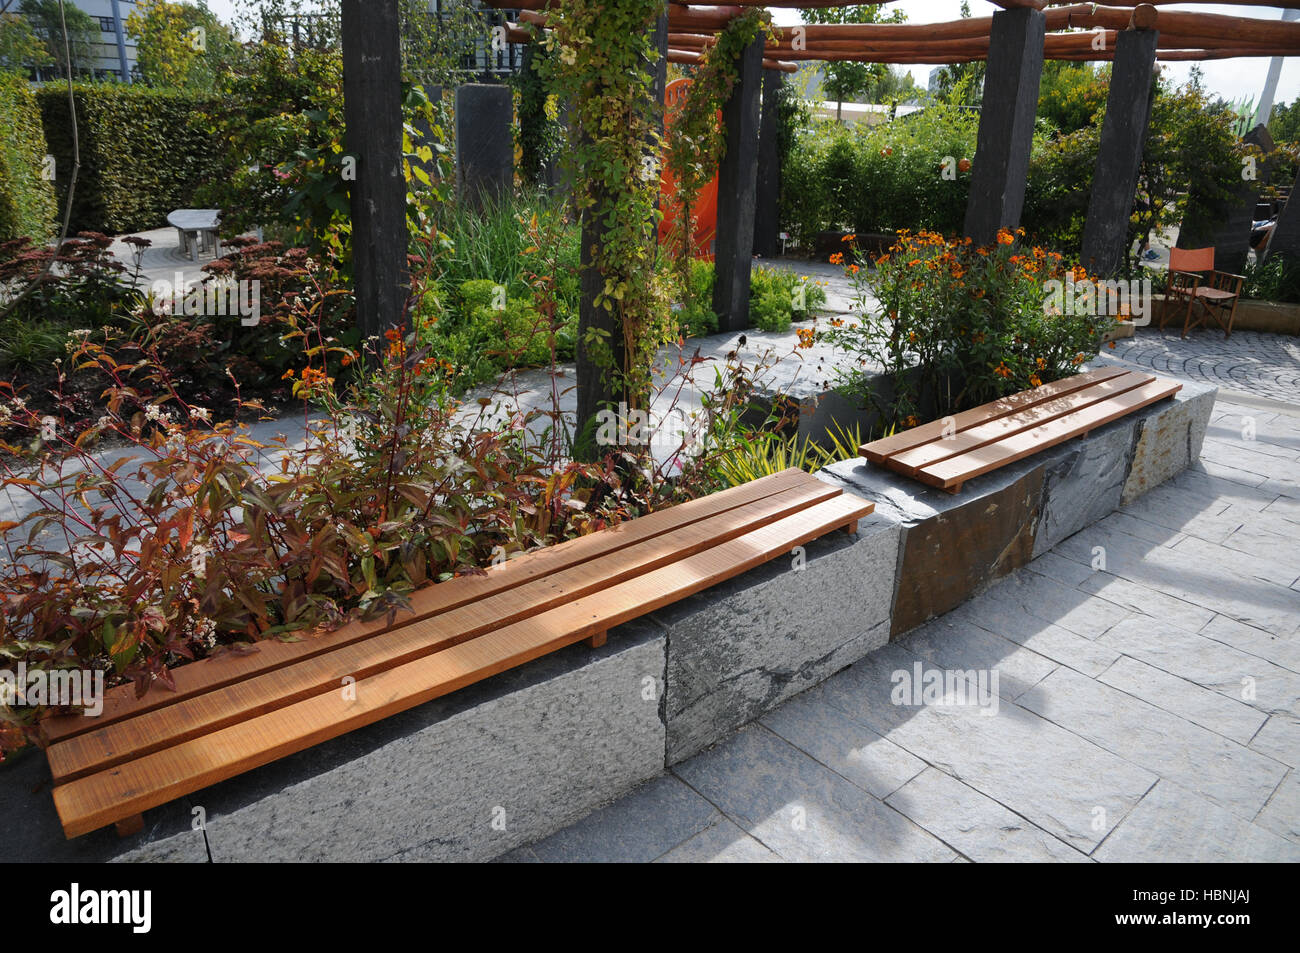 Garden with bench made of stone and wood Stock Photo - Alamy